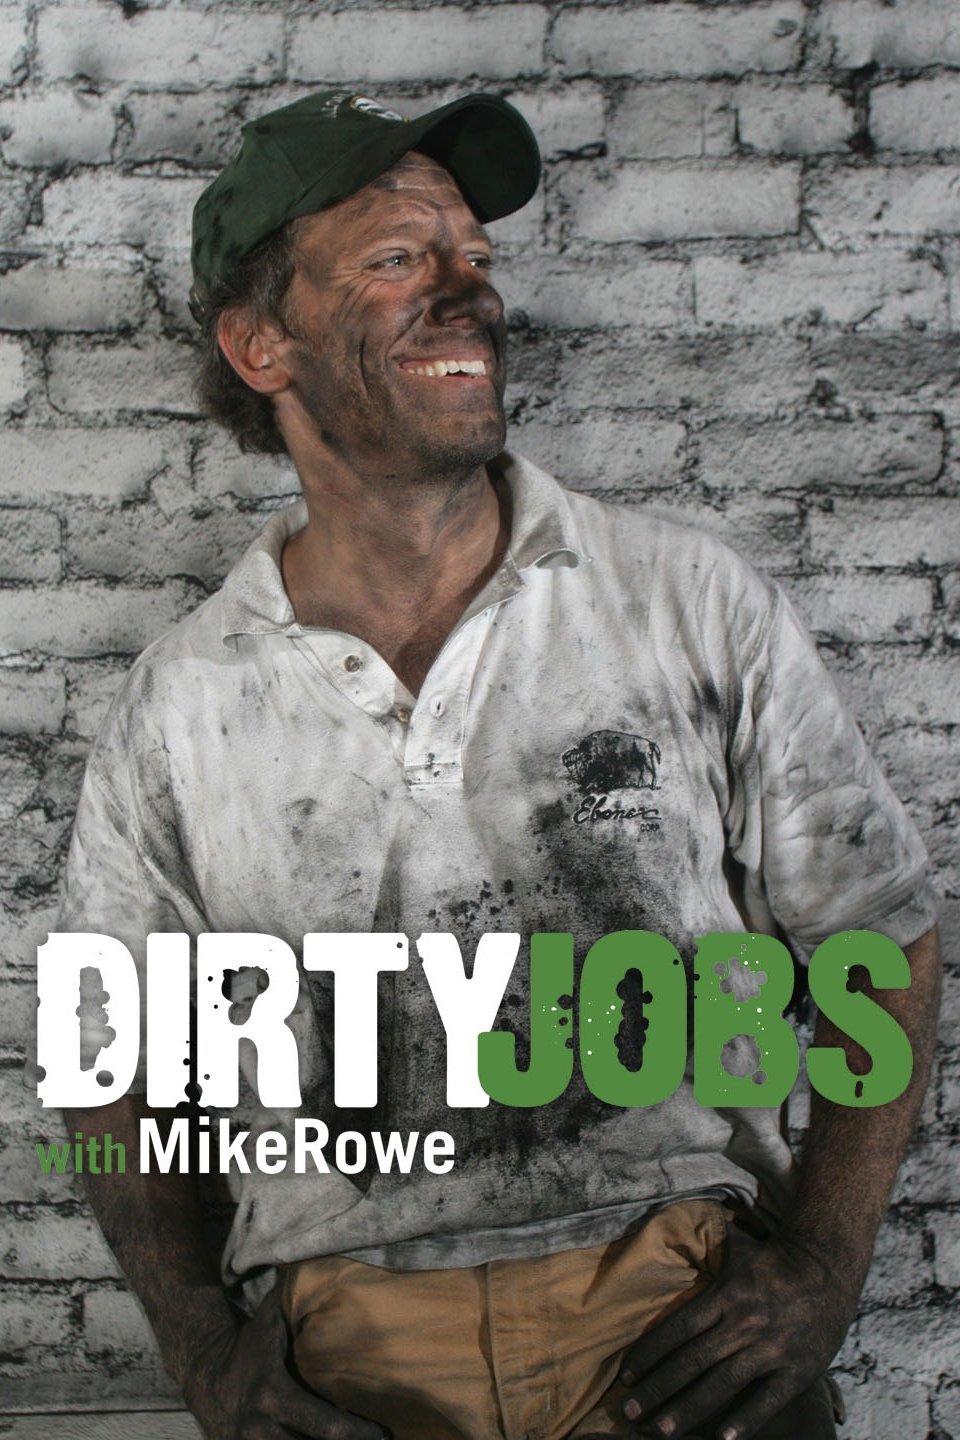 When will dirty jobs return in 2012